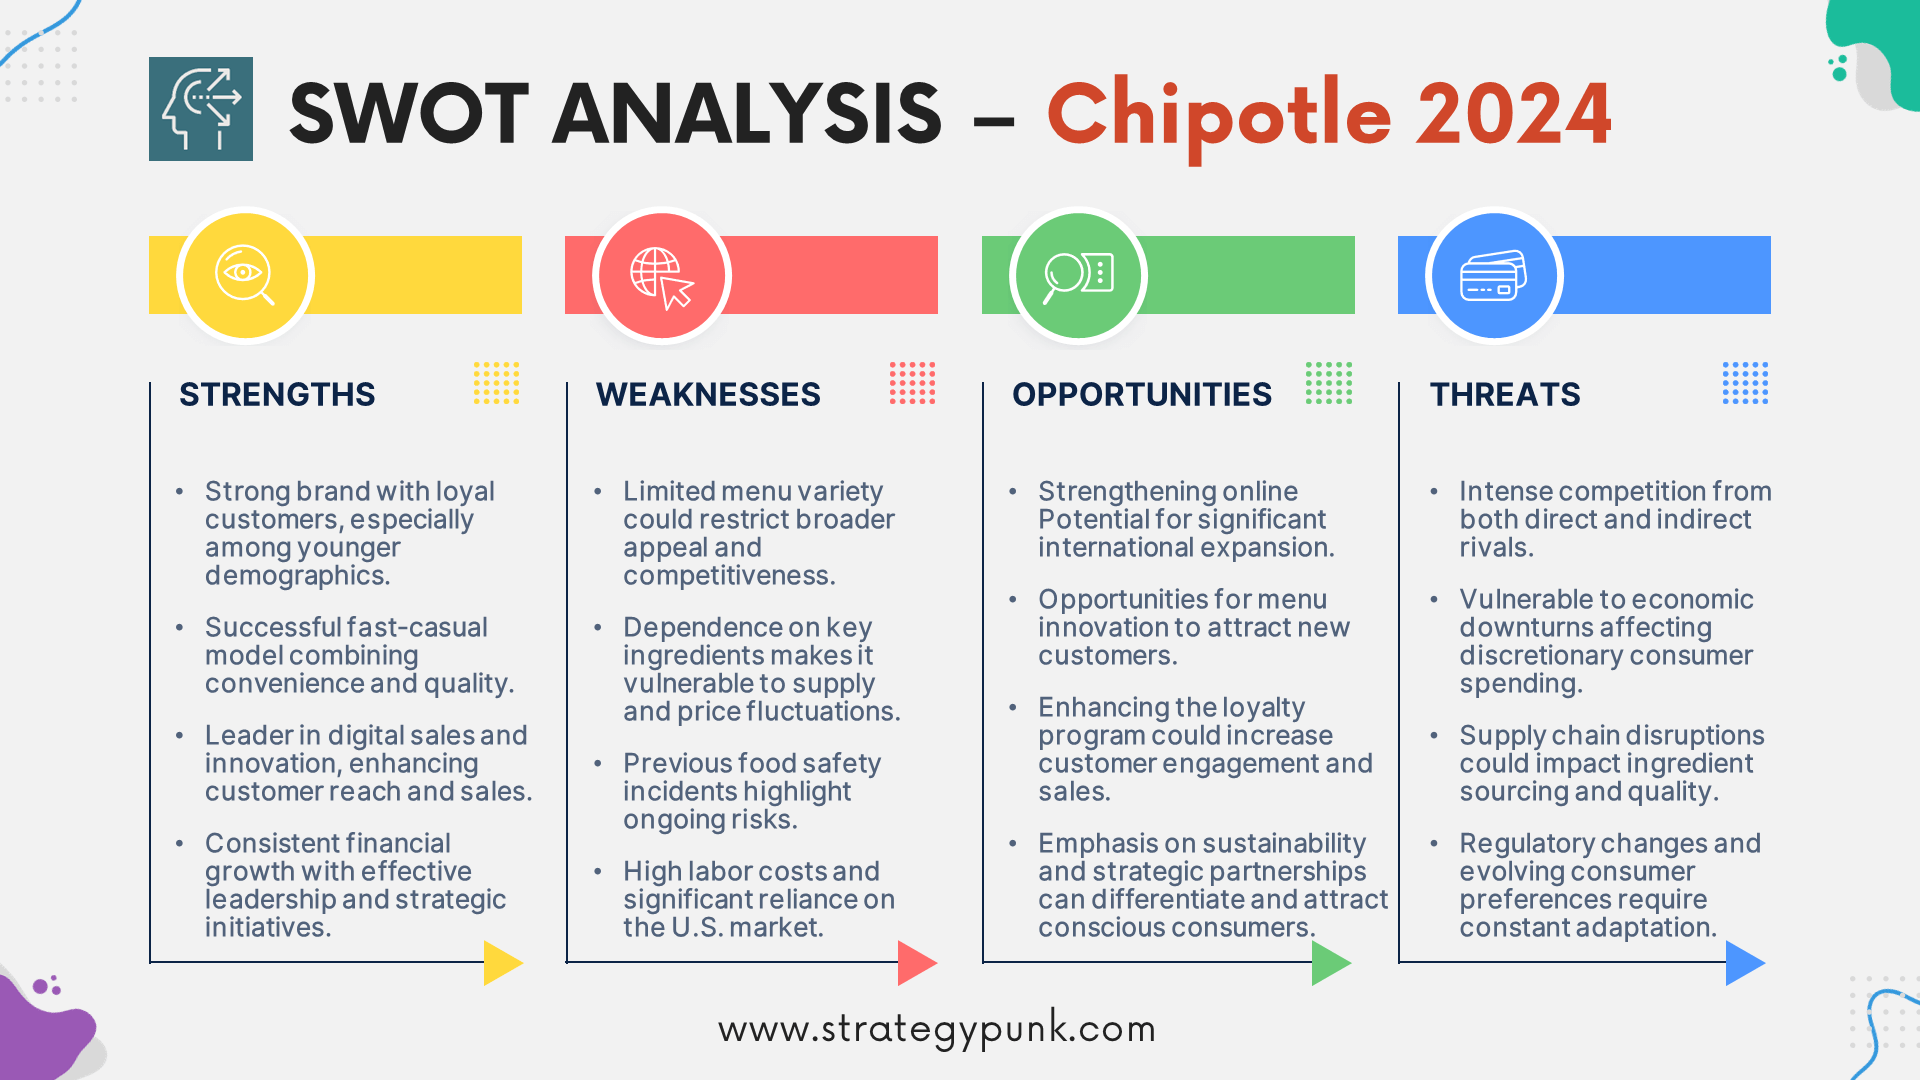 Strategic Insights 2024: A SWOT Analysis of Chipotle (Plus Free PPT)